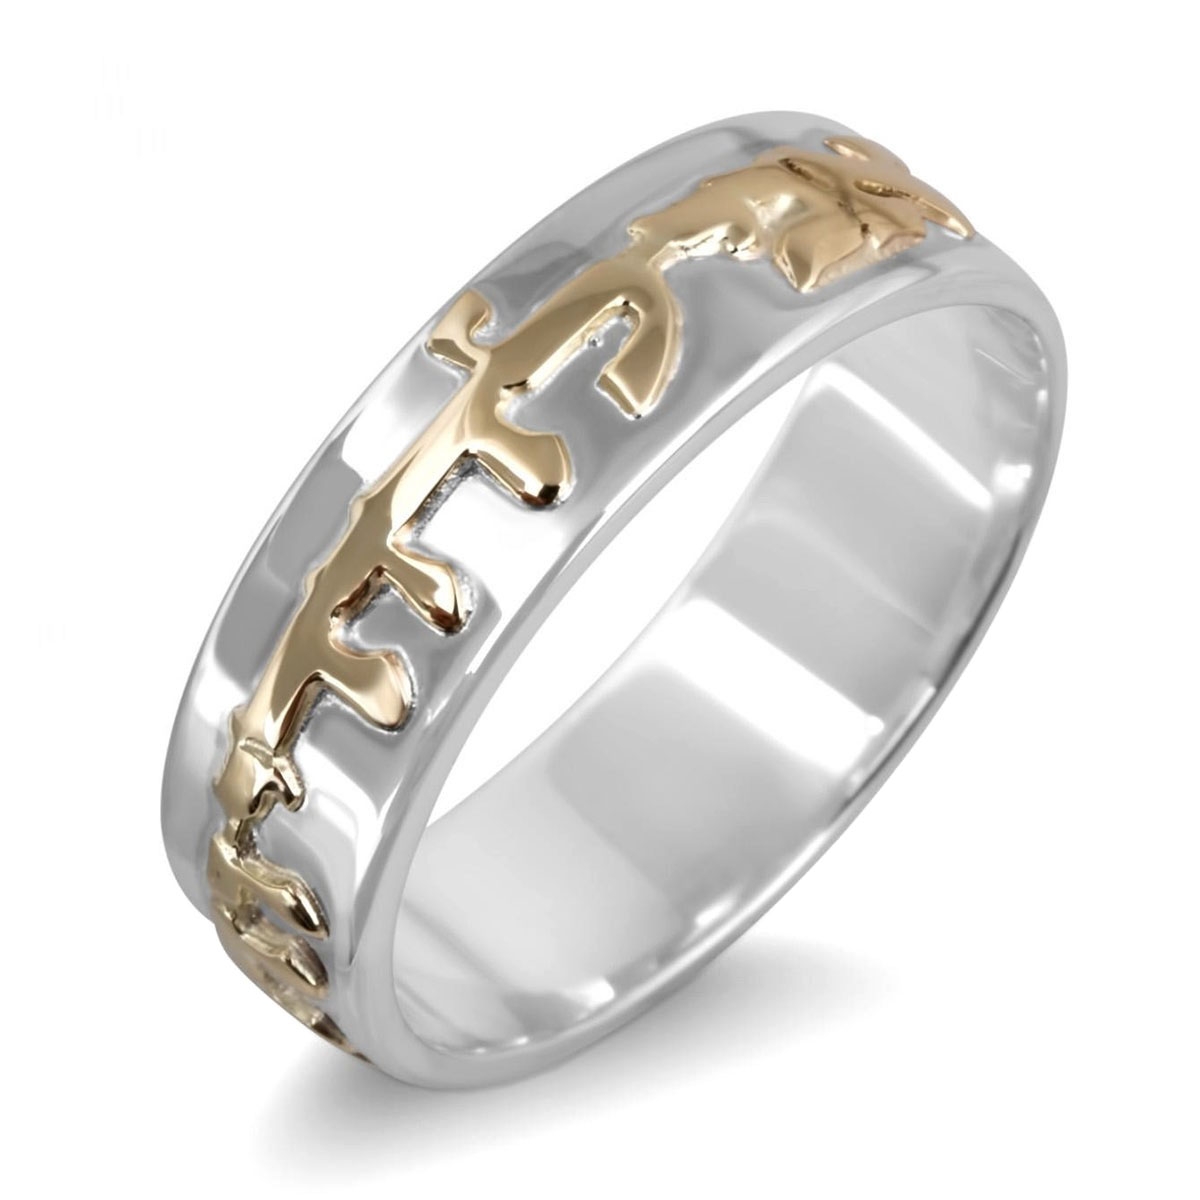 Sterling Silver and 14k Gold Customizable Ring with English / Hebrew Inscription - 2